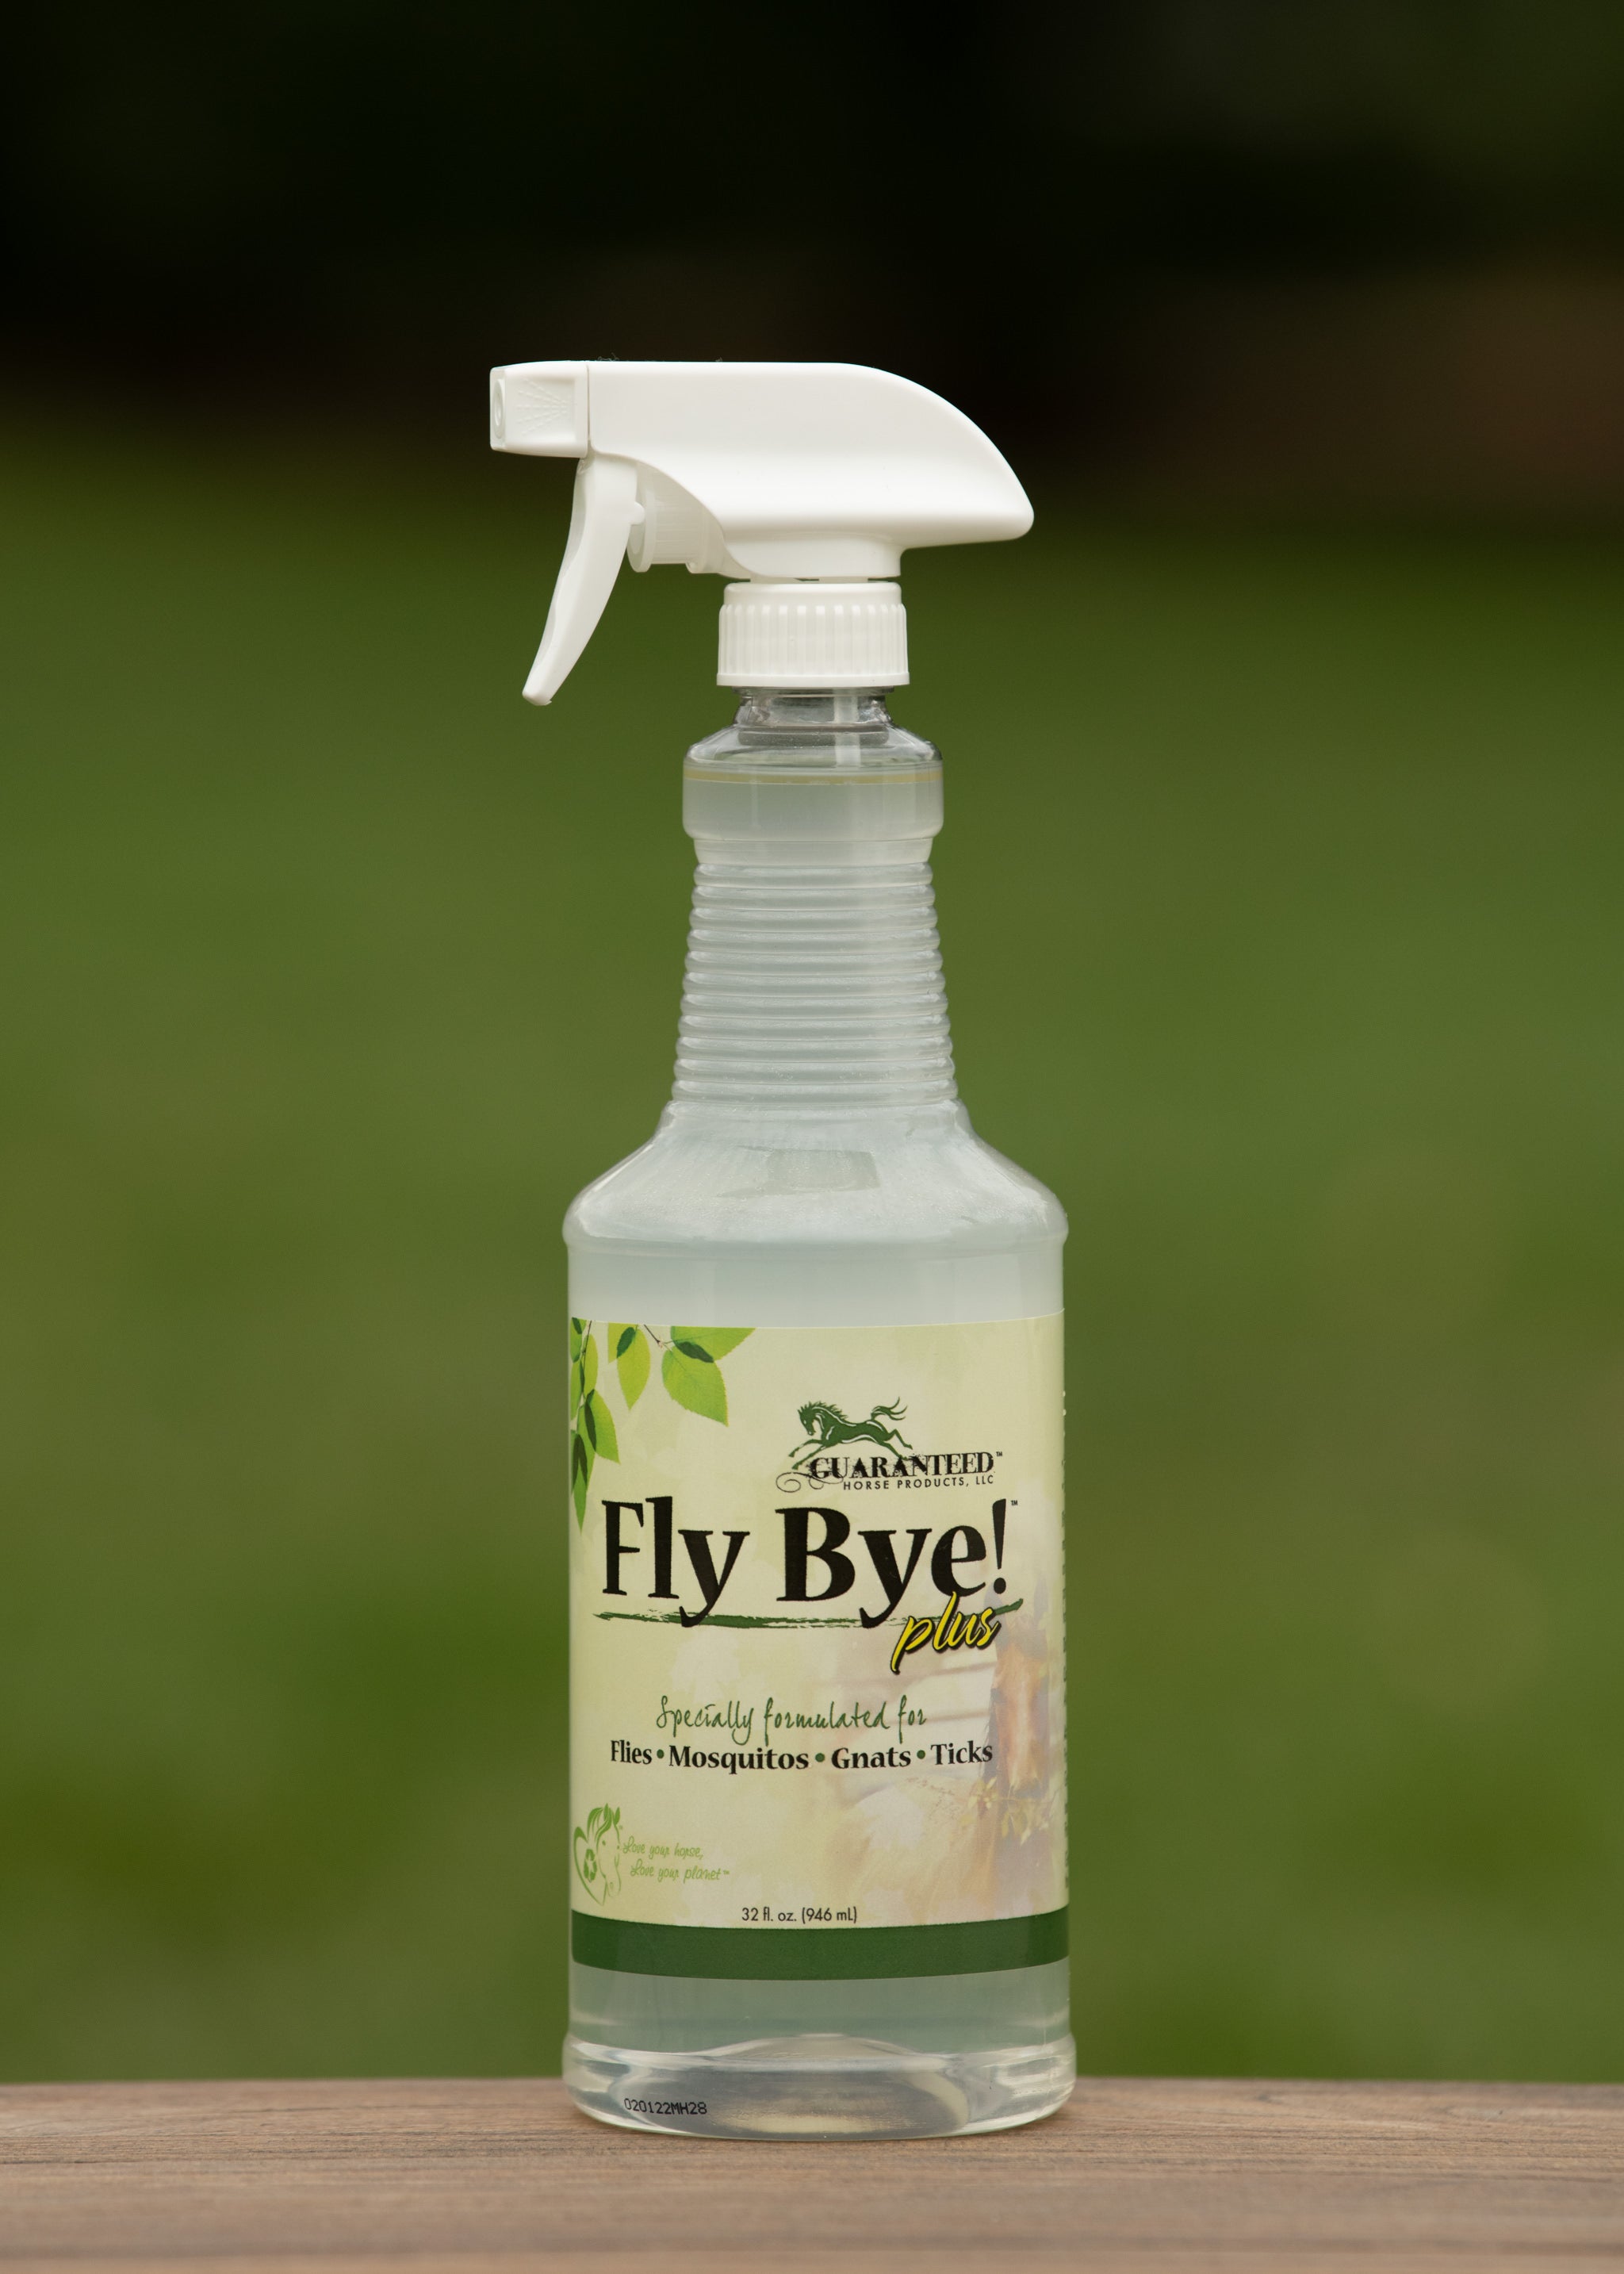 Fly Bye! Plus 32 oz fly repellent 